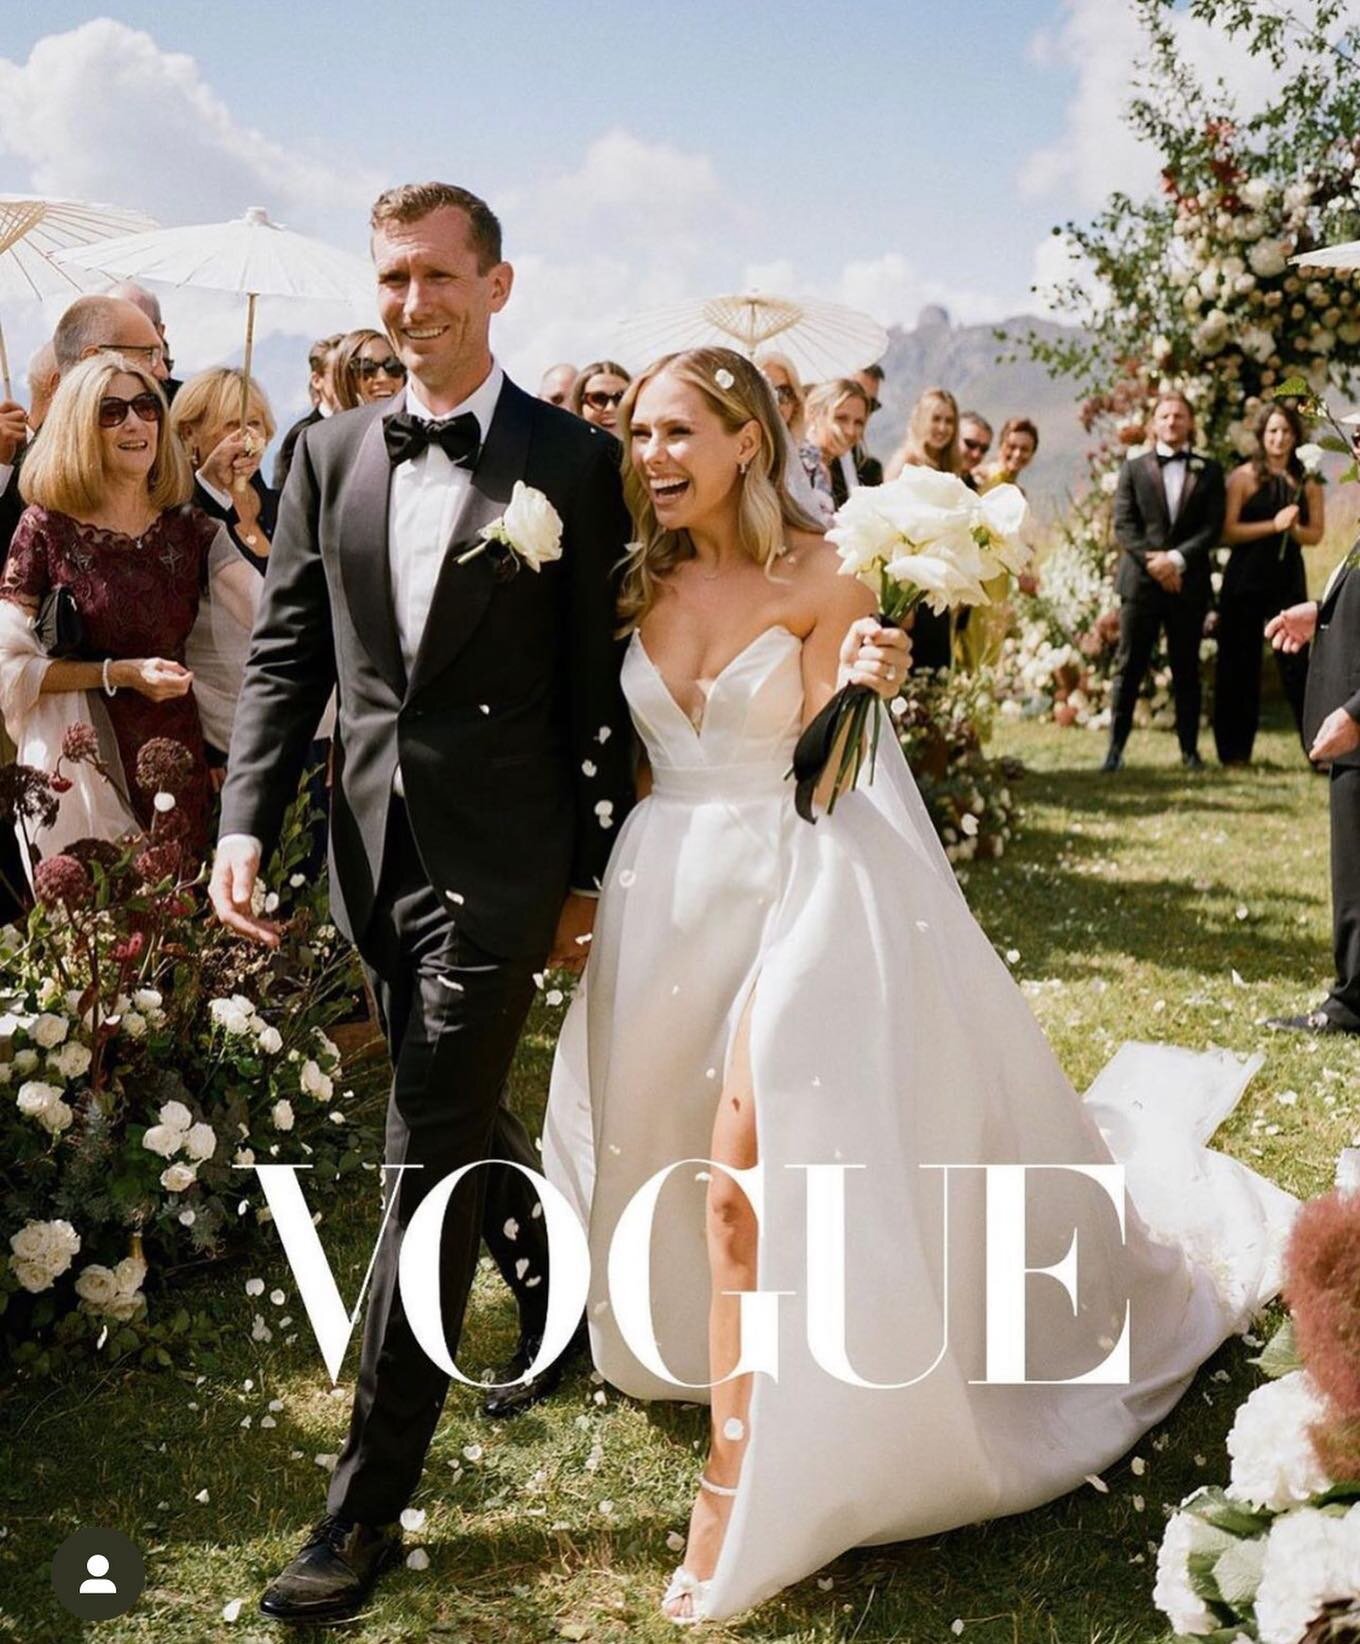 I met charli and matt in 2019 and due to the dreaded covid we postponed until last year, but it was well worth the wait, thanks to all the amazing team who came to verbier to make this happen 🥂  #verbier #verbierweddings #vogue #vogueaustralia #vogu